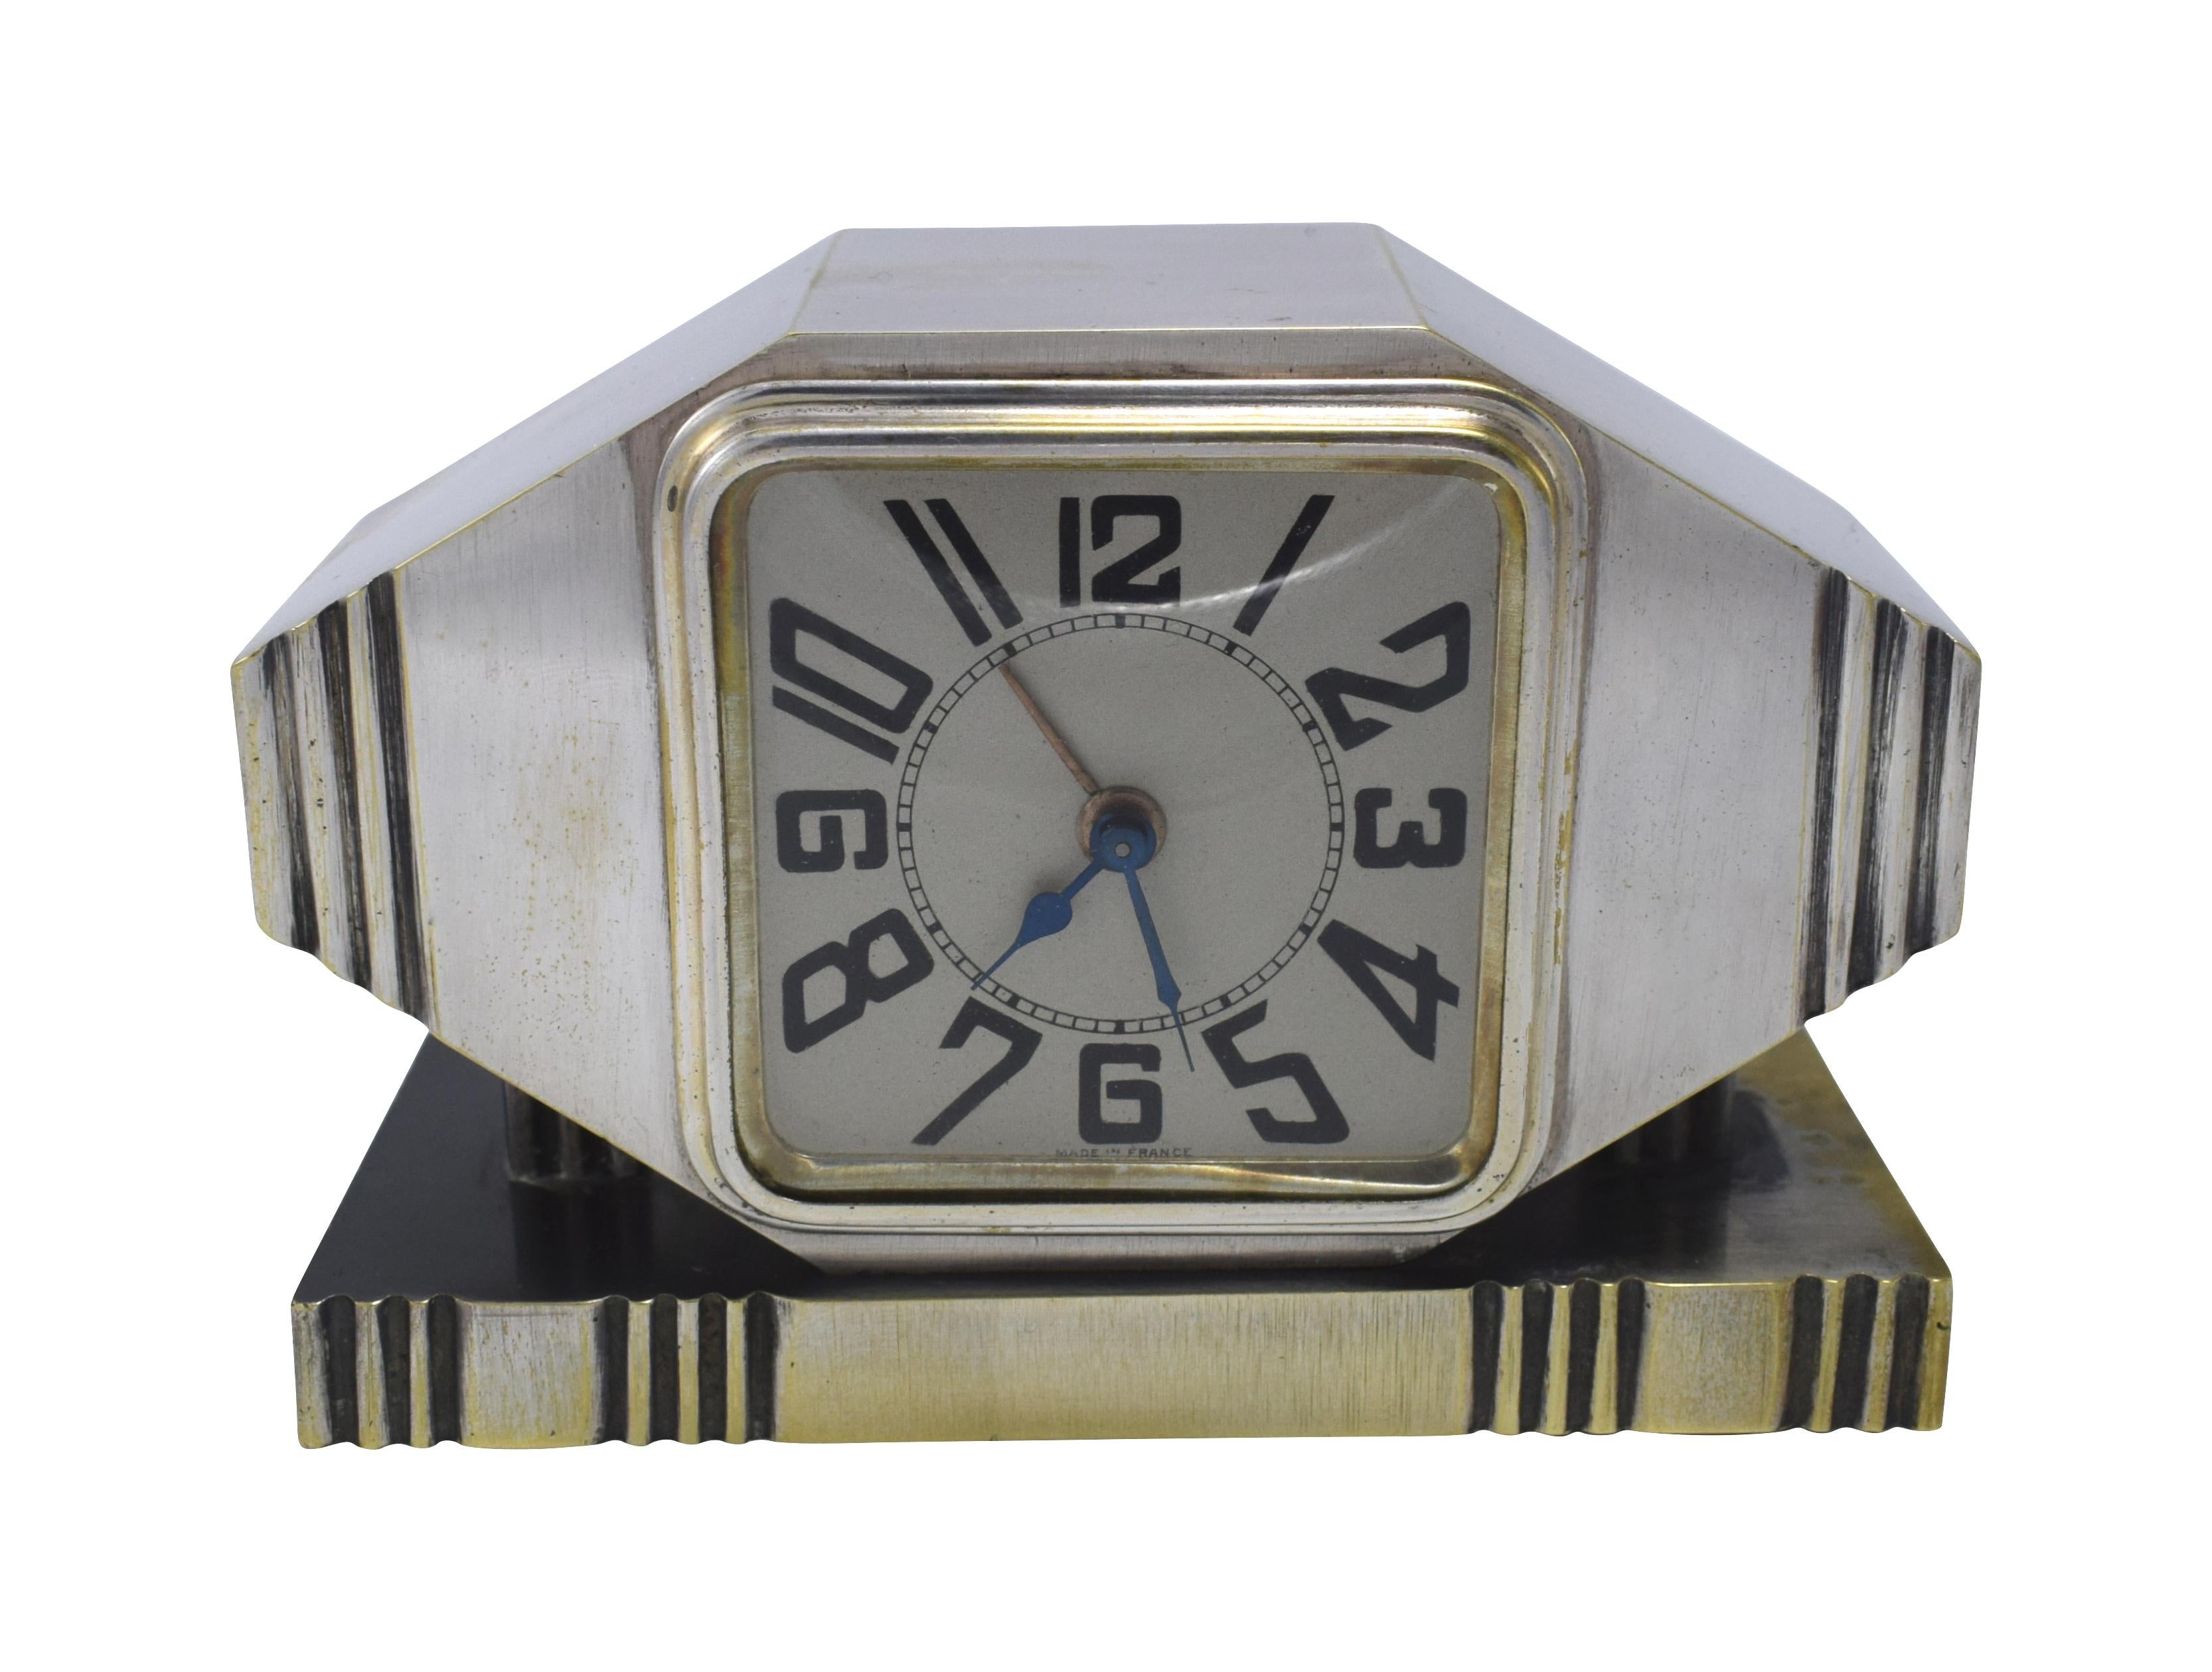 If we have to be rudely awoken from our slumber then why not soften the ordeal with this stylish alarm clock. For anyone who seeks machine age collections from the Art Deco period they will know all too well how scarce these pieces are. This clock